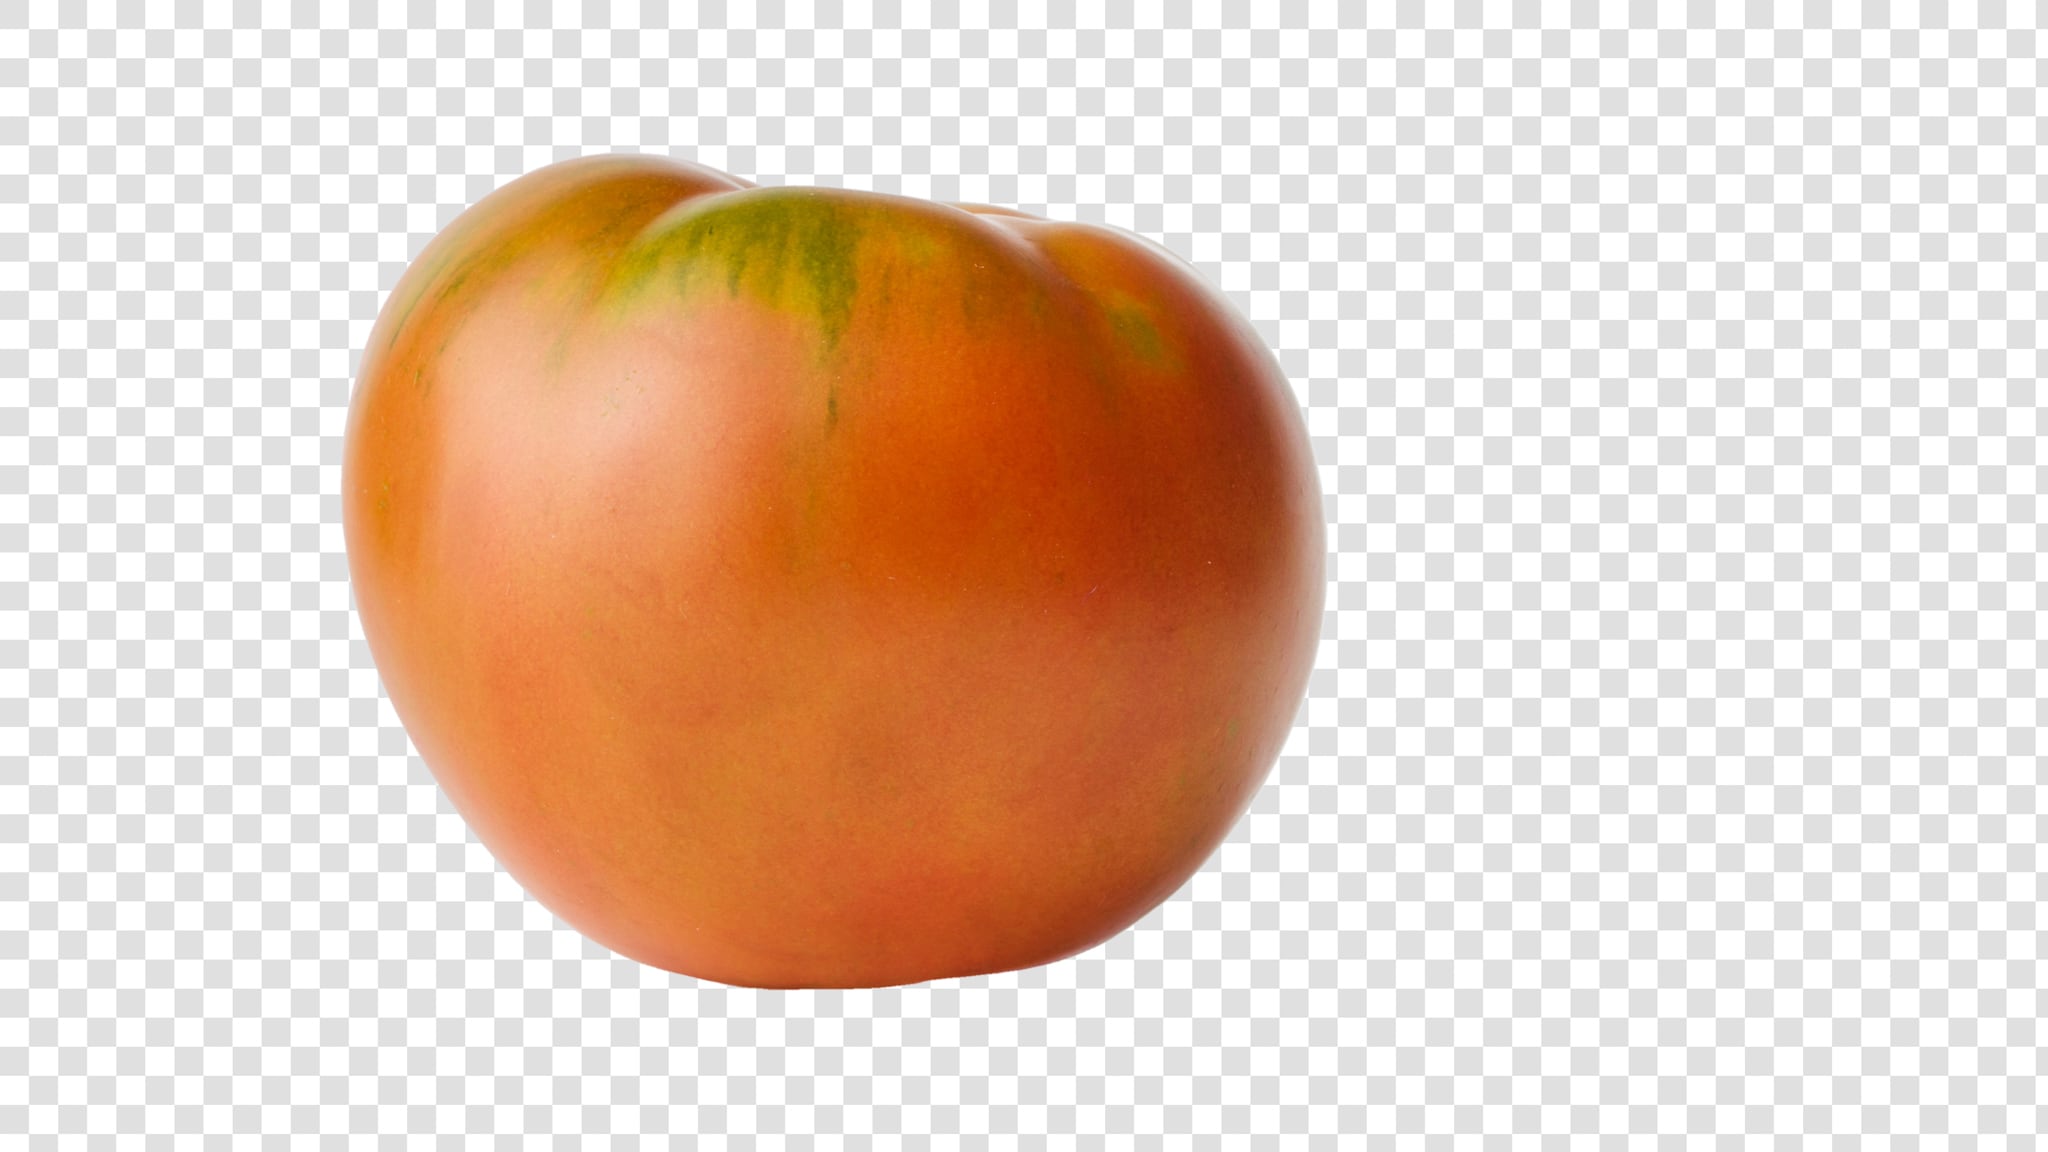 Tomato PSD image with transparent background